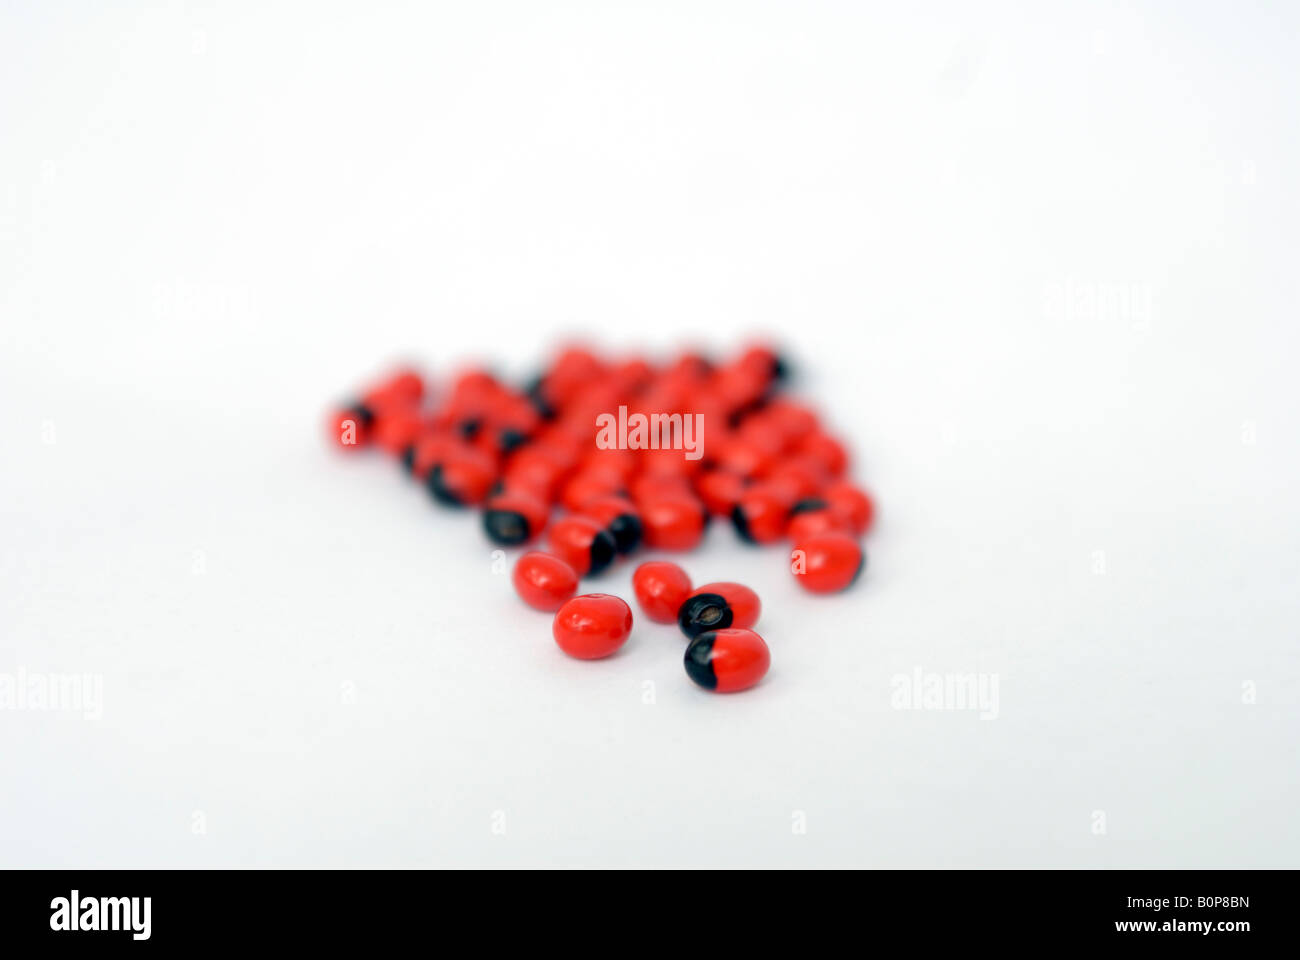 Small red seeds with a black spot on white background Stock Photo